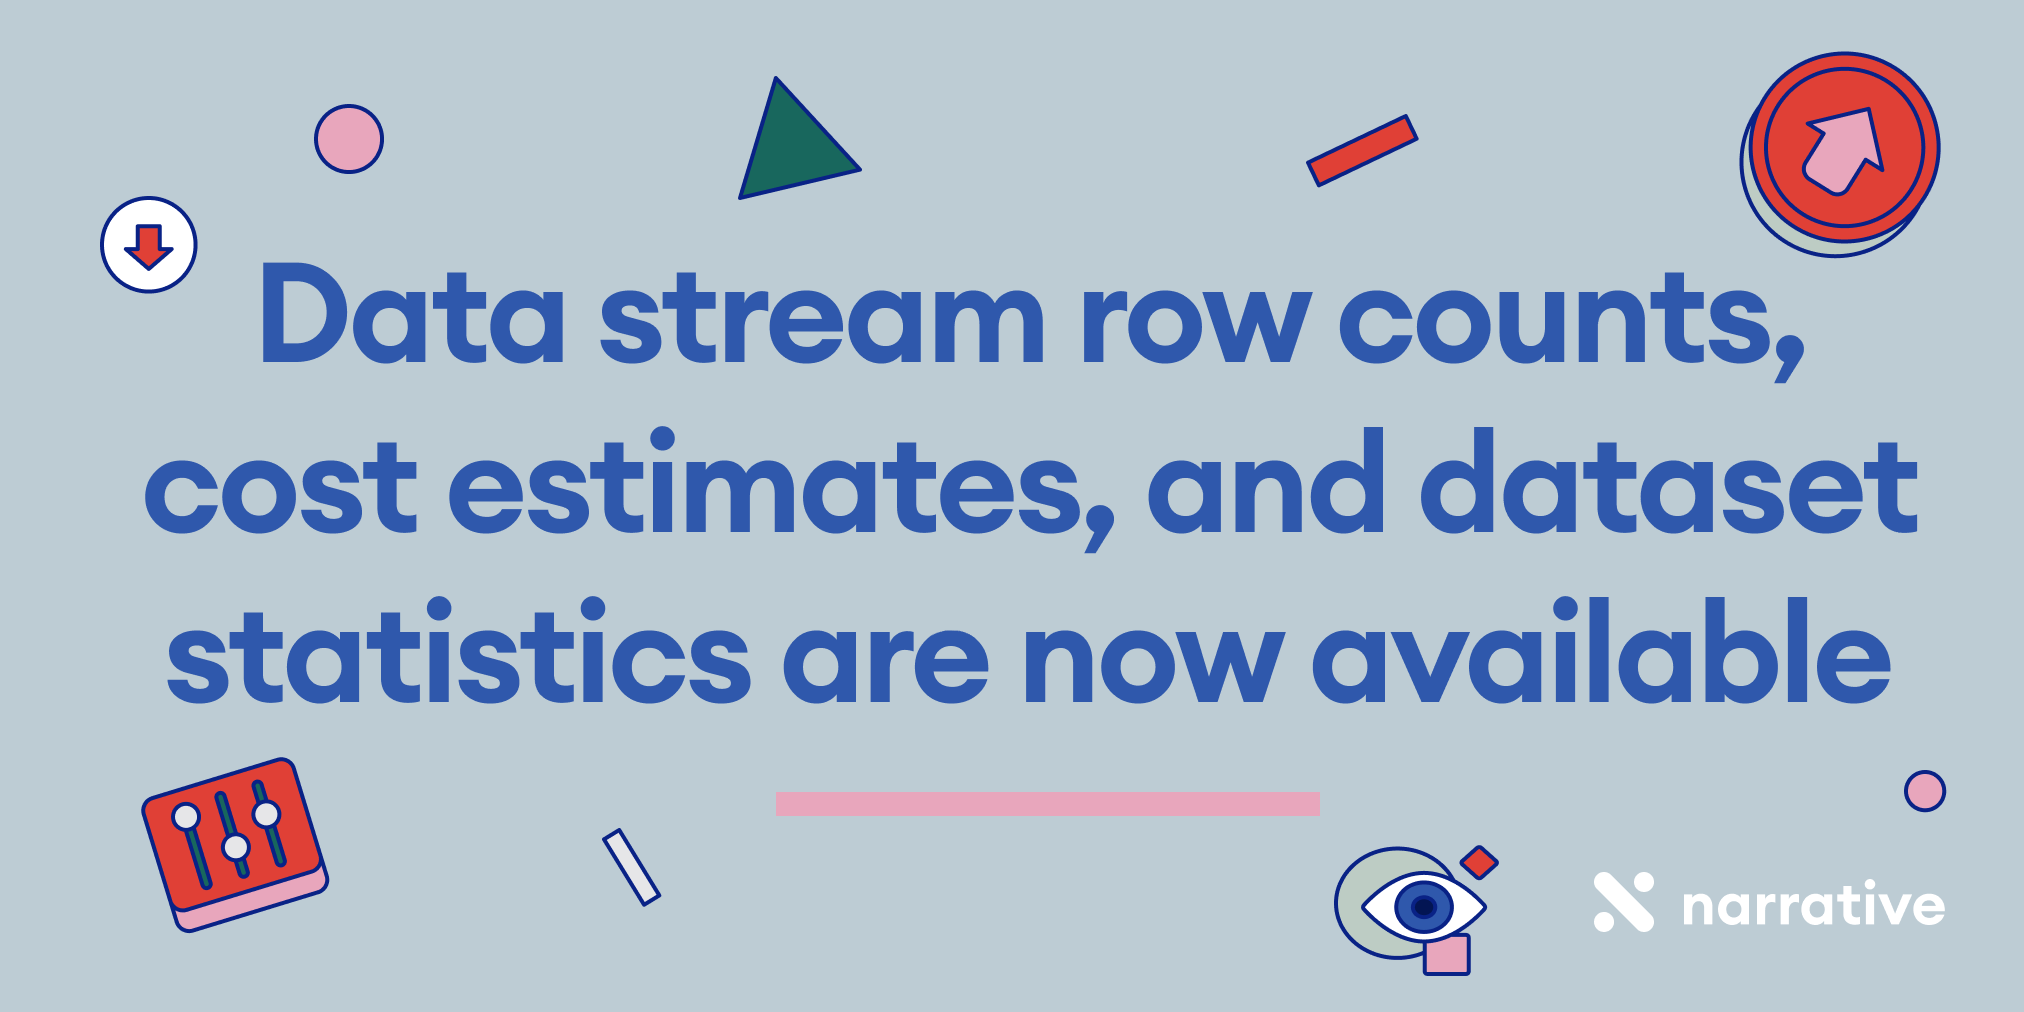 Data stream row counts, cost estimates, and dataset statistics are now available